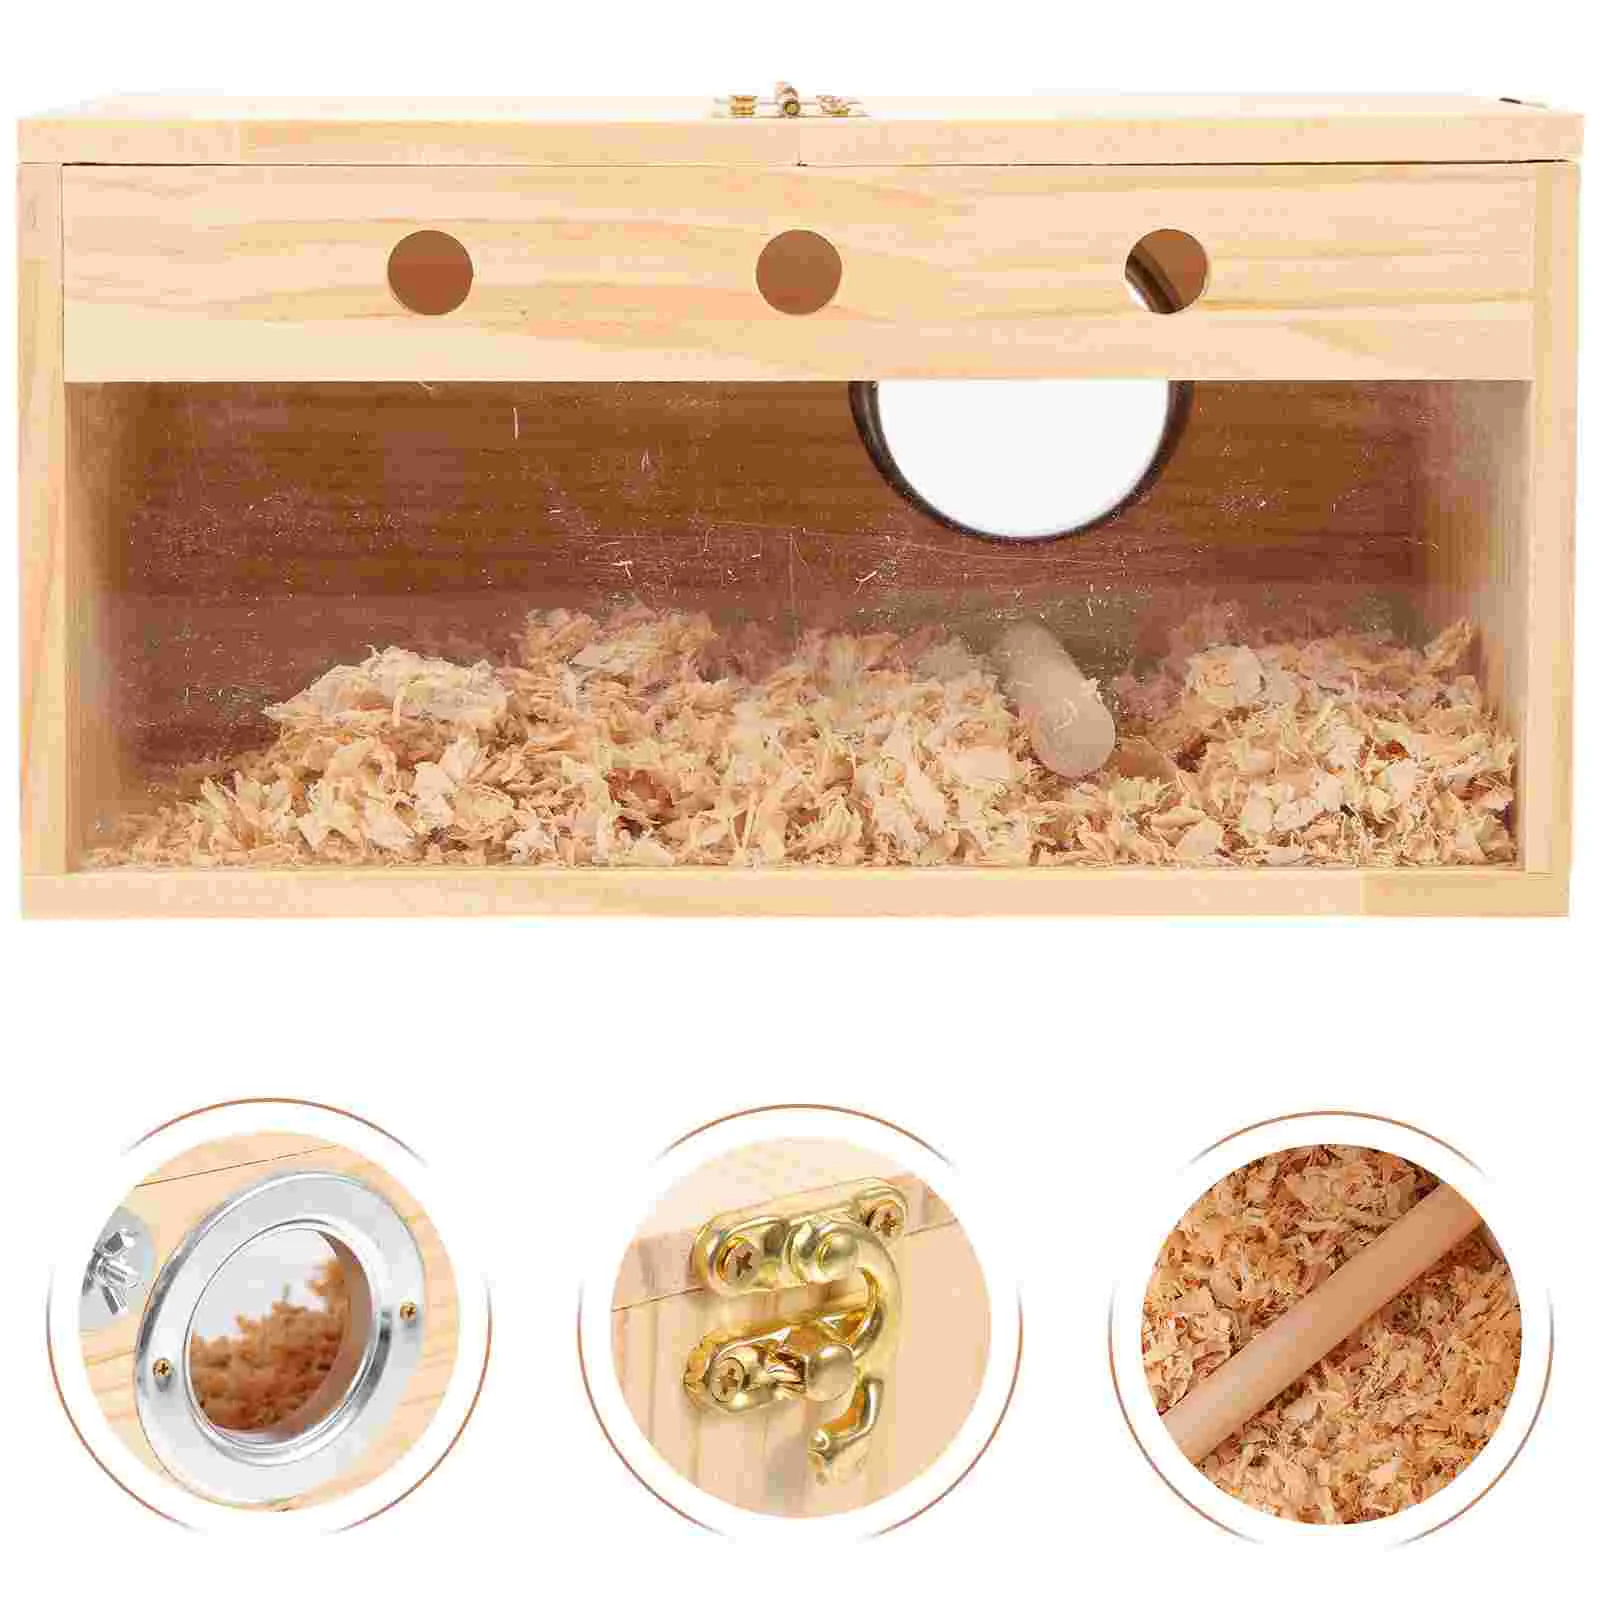 

Toys Parrot Breeding Box Wood Parakeet Nest Accessory Garden Bird House Munia Nests Supply Wooden Birdhouse Cage Cages